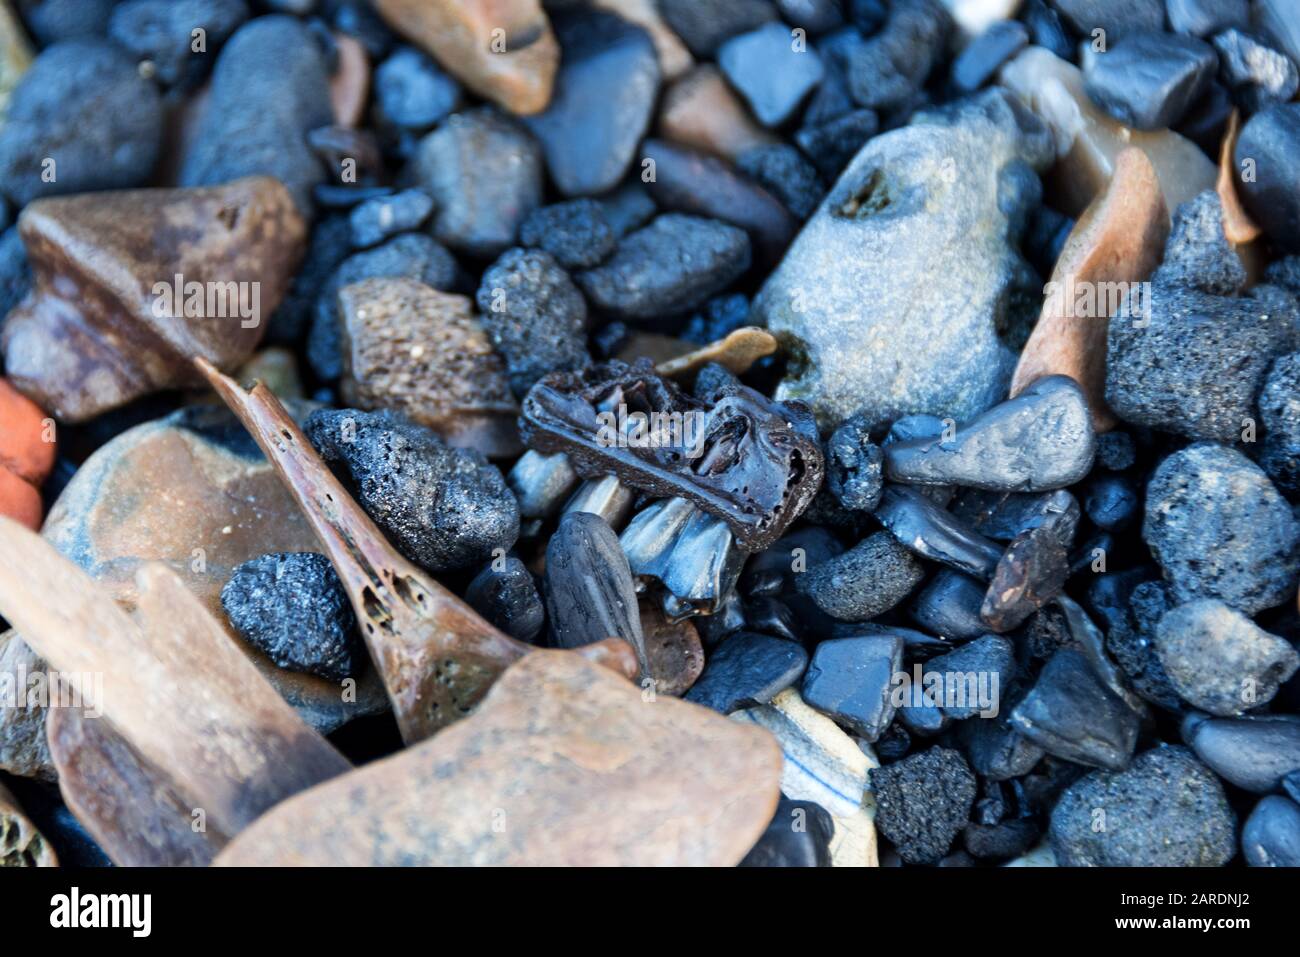 Fragment of animal jawbone with teeth among coal lumps, old animal bones, and black pebbles on the Thames foreshore, Greenwich, London. Stock Photo